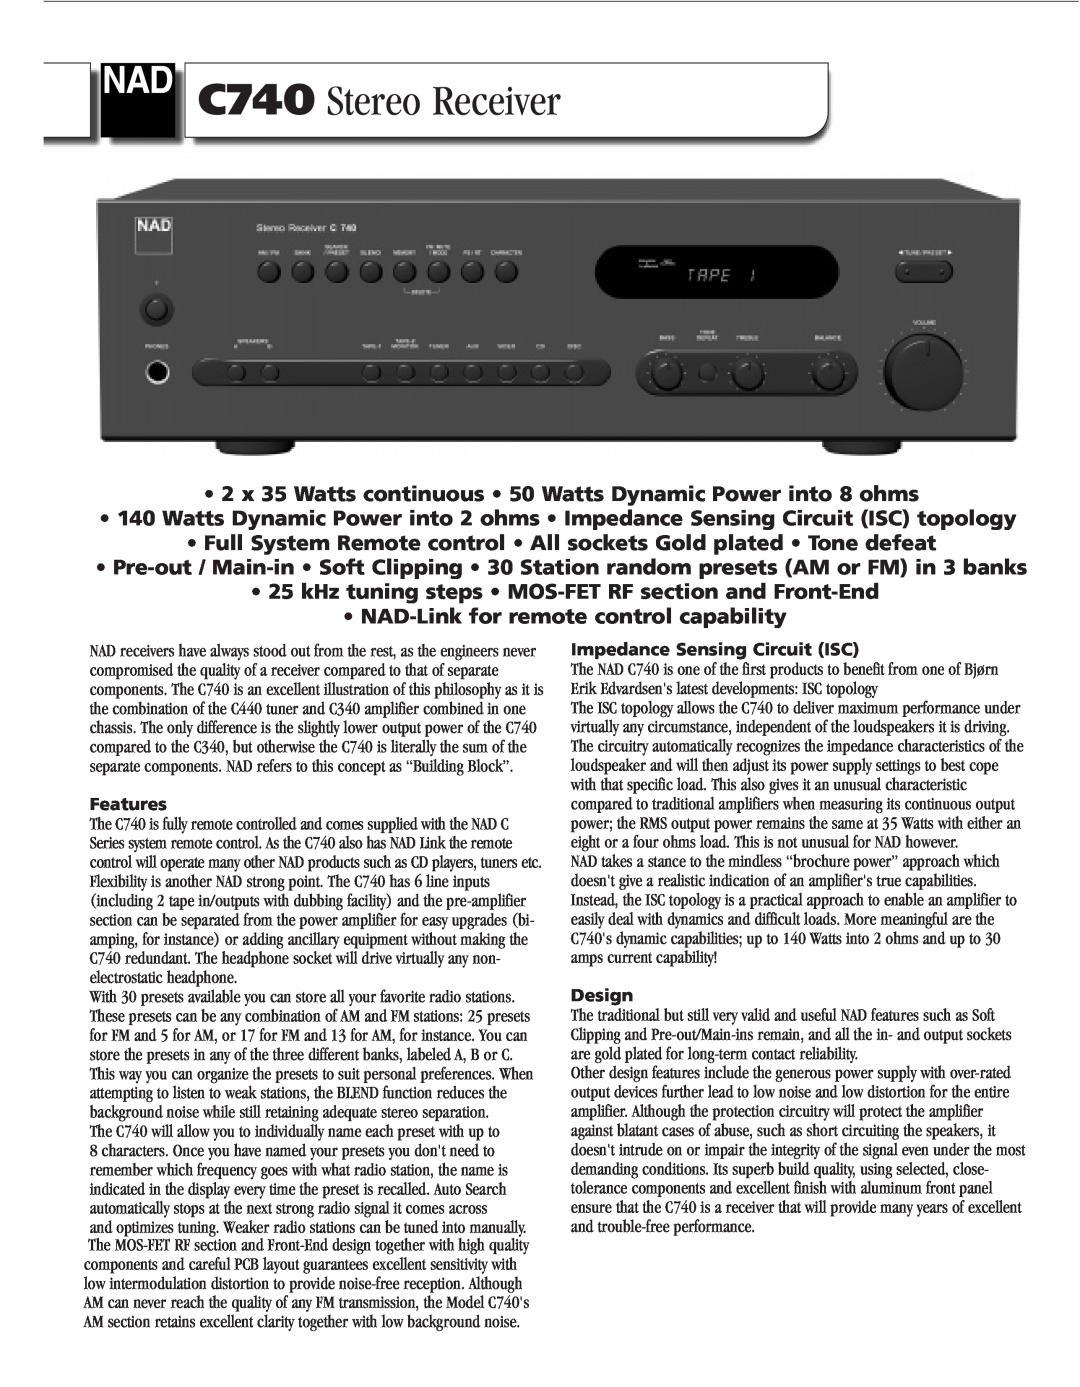 NAD brochure C740 Stereo Receiver 